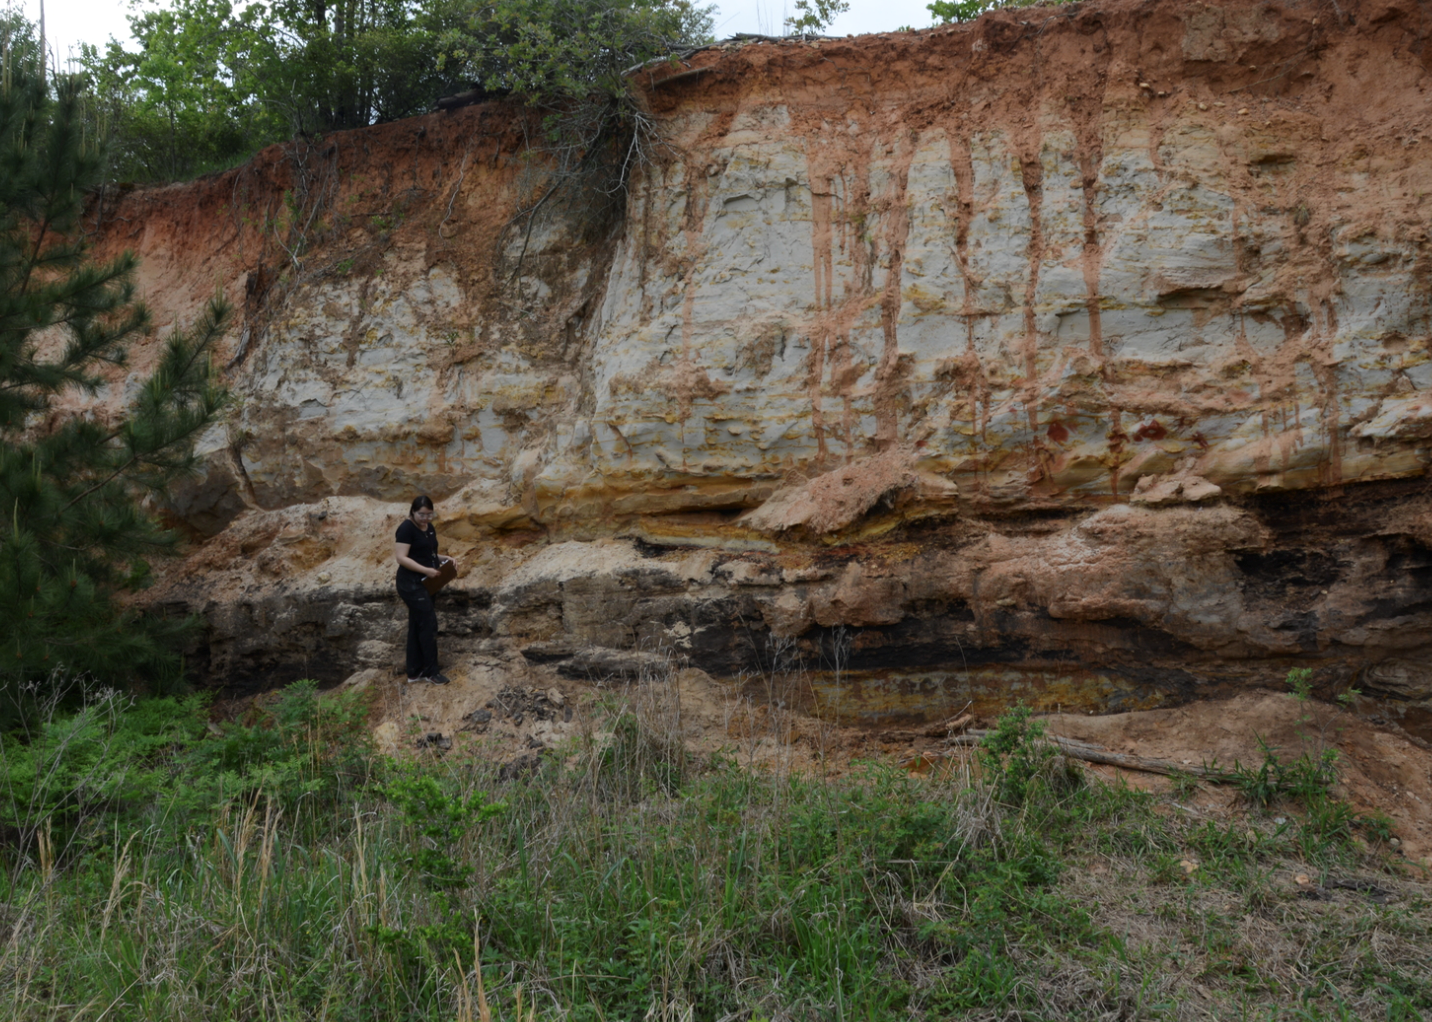 The author, Katherine Garcia, in the field in front of some sedimentary outcrops